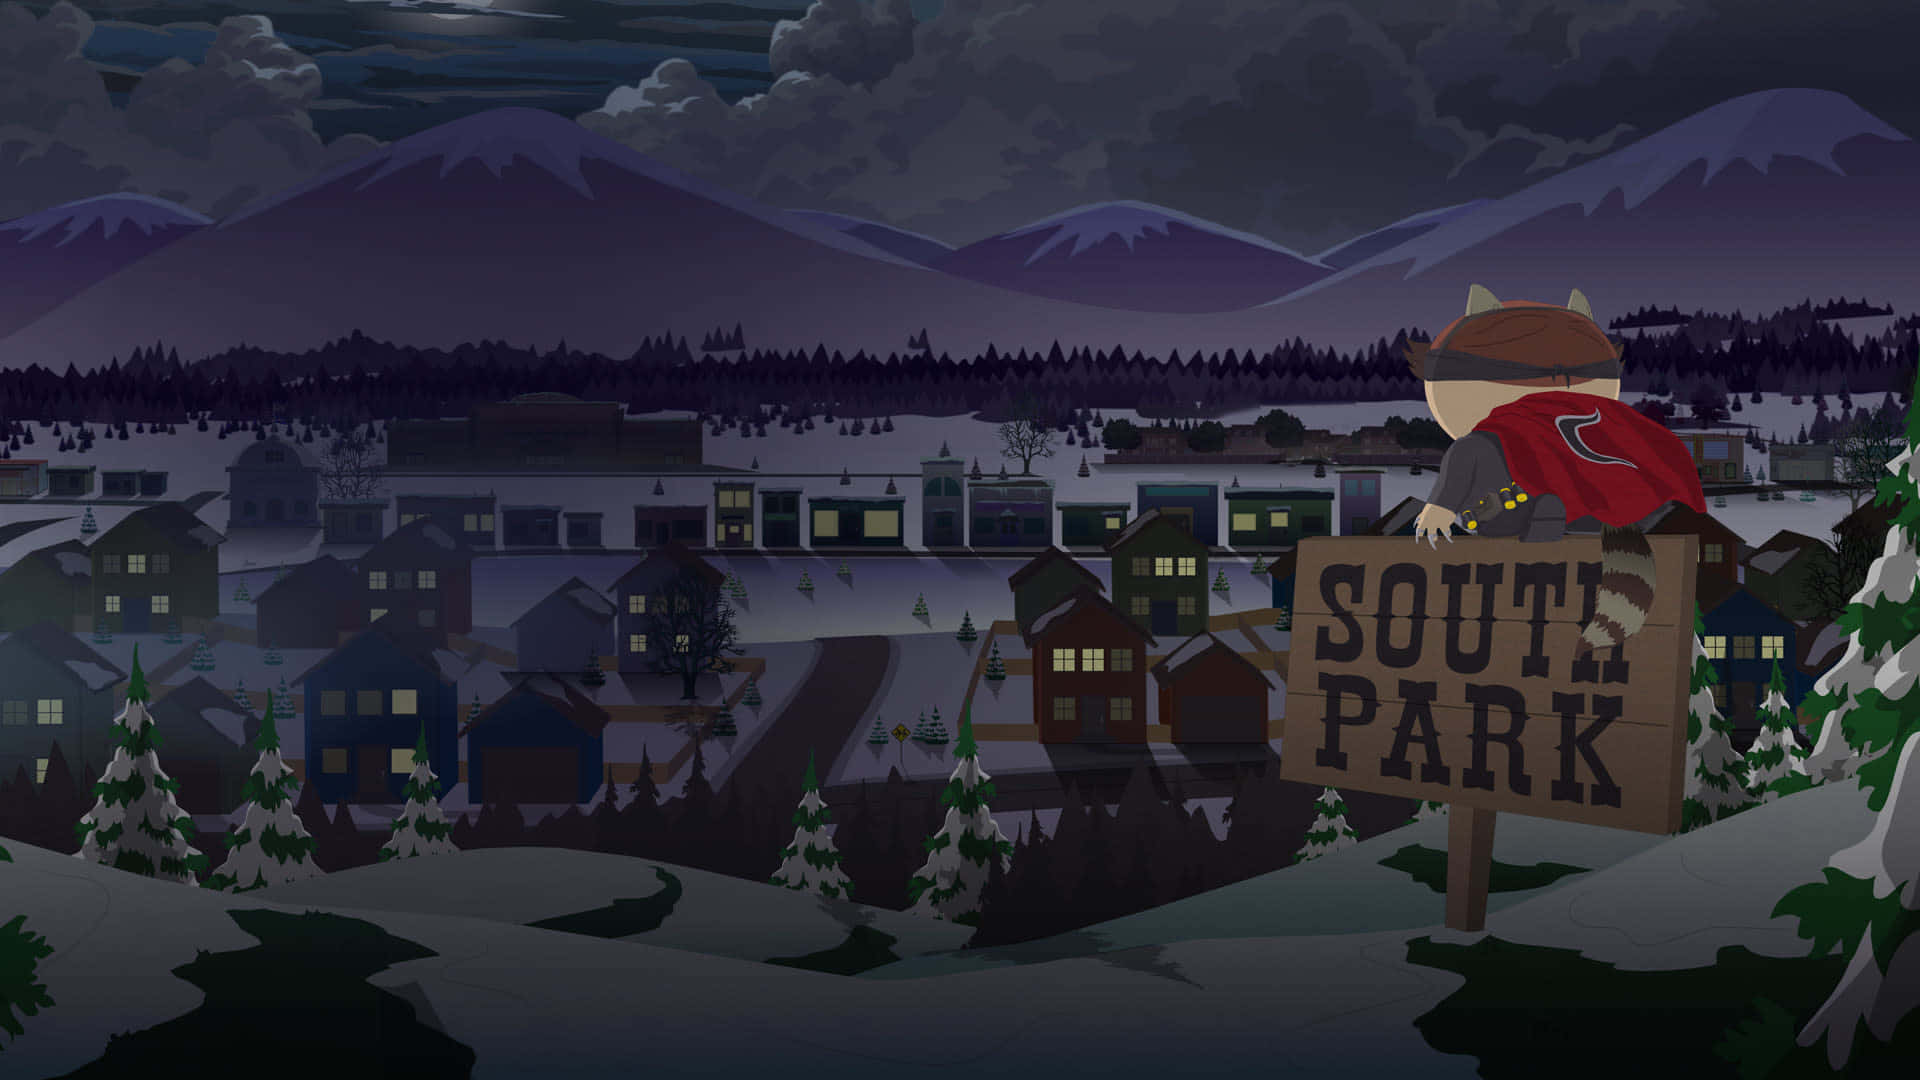 South Park- The Best Show on TV